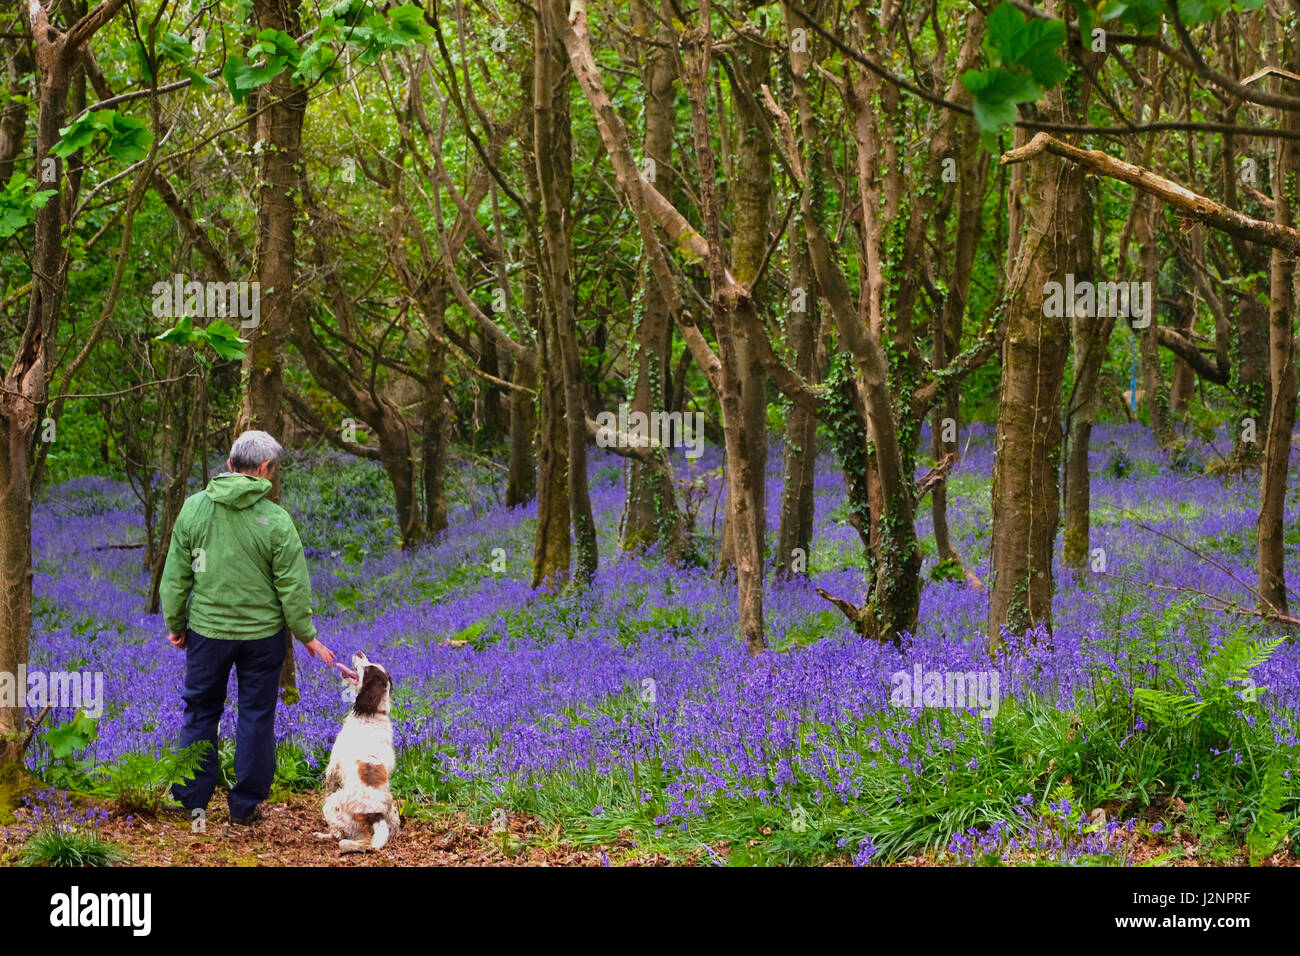 Eype, Dorset, UK. 30 April 2017.  A dog walker enjoys  a footpath through stunning bluebell woods in West Dorset despite rain and a drop in temperature. Credit: Tom Corban/Alamy Live News Stock Photo